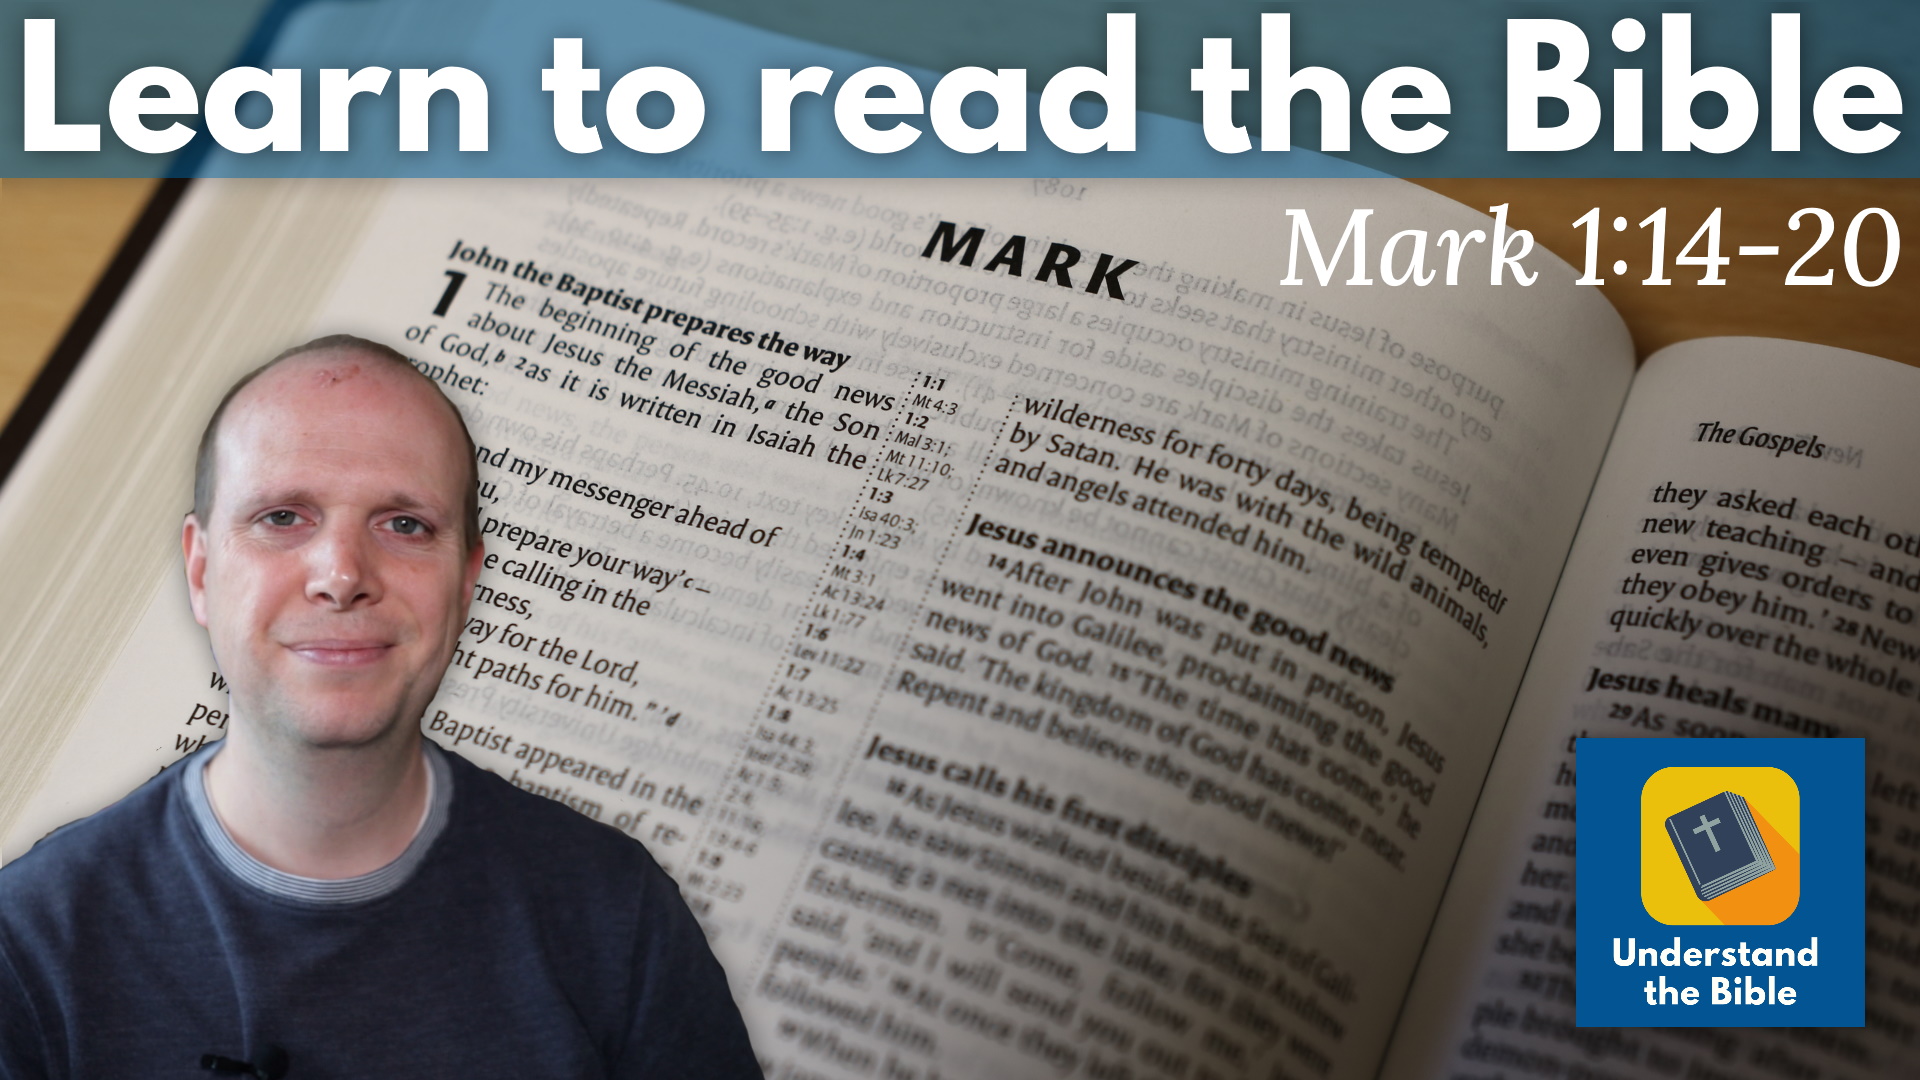 Mark 1:14-20: Learn to read the Bible #3